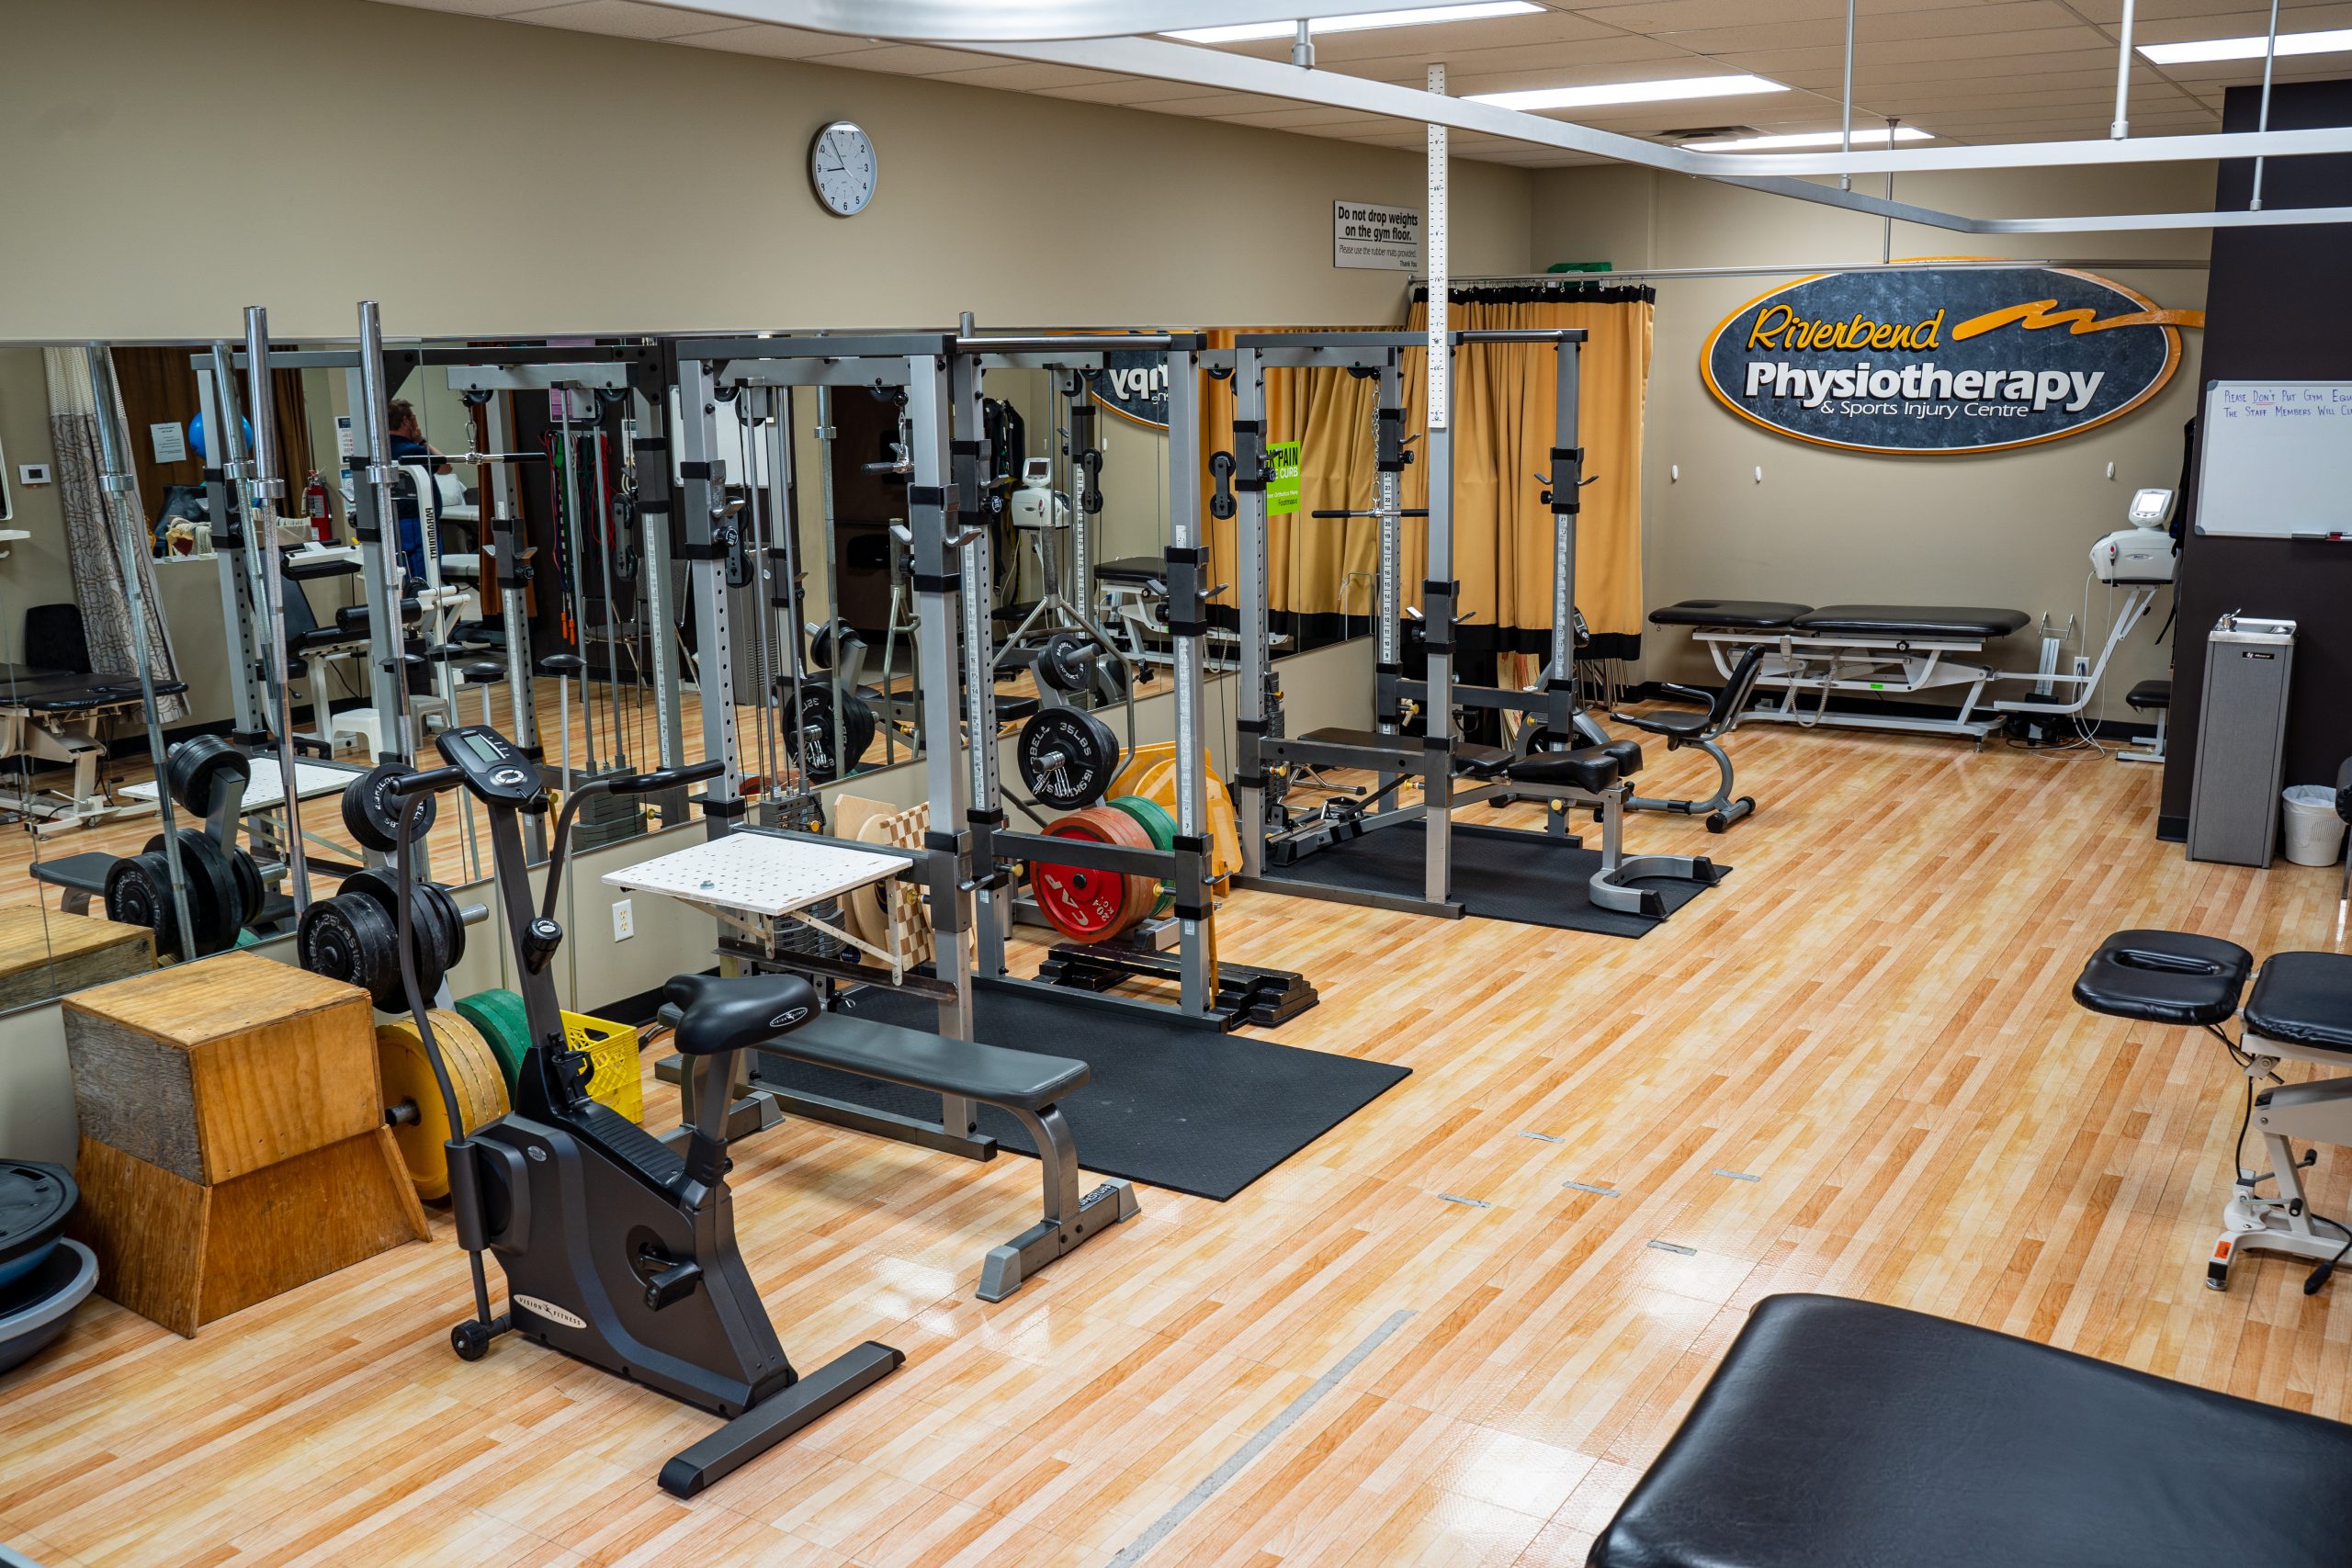 Image of the inside of Riverbend Physiotherapy with workout machines and physiotherapy beds